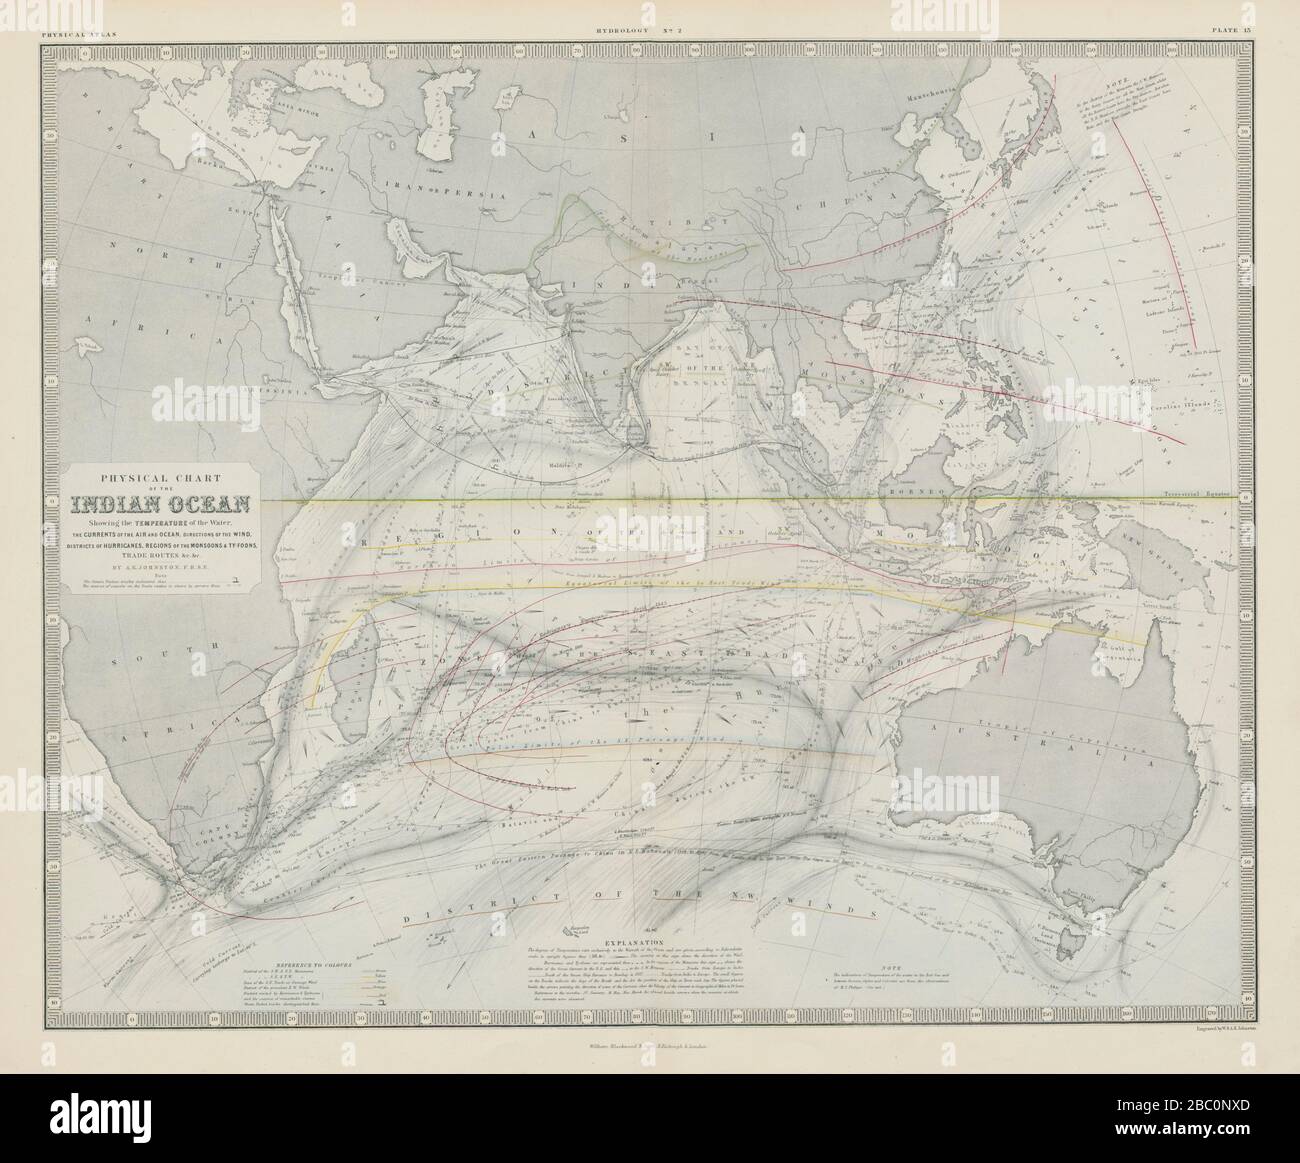 Indian Ocean physical chart. Hurricane Typhoon tracks. Currents 1856 old map Stock Photo